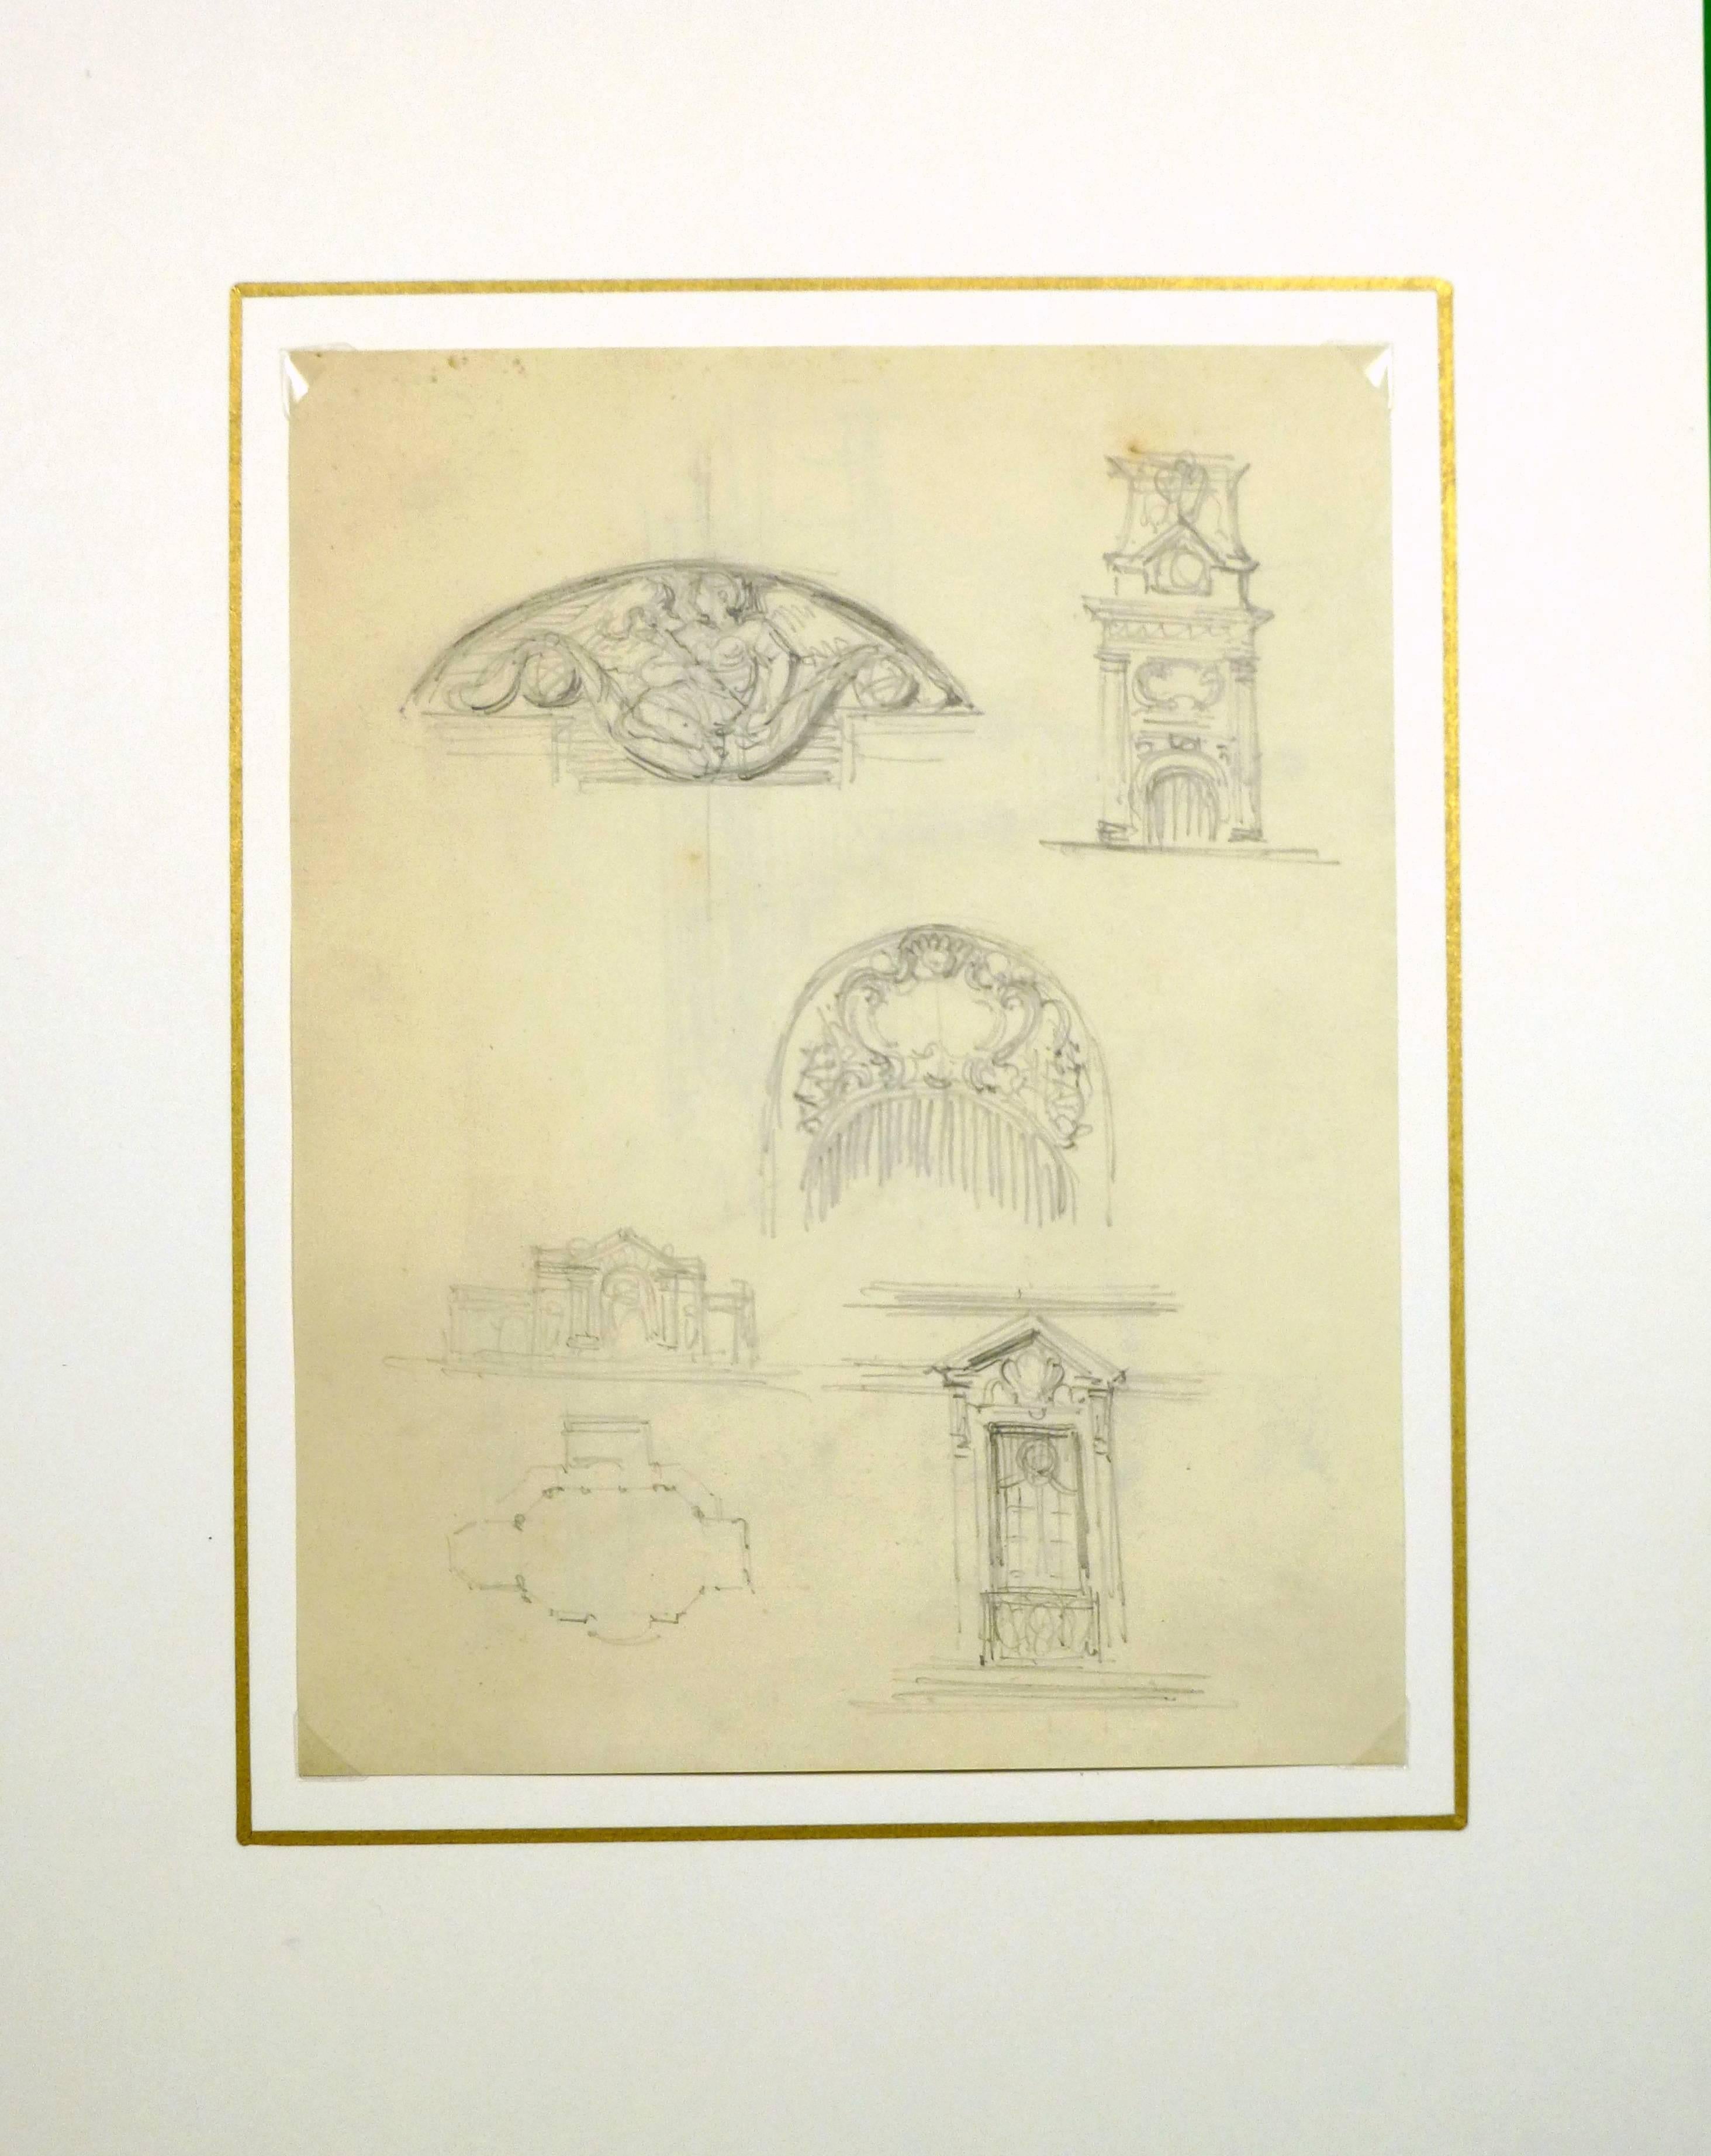 Delightful French pencil sketches of architectural elements, circa 1910.

Original artwork on paper displayed on a white mat with a gold border. Mat fits a standard-sized frame. Archival plastic sleeve and Certificate of Authenticity included.